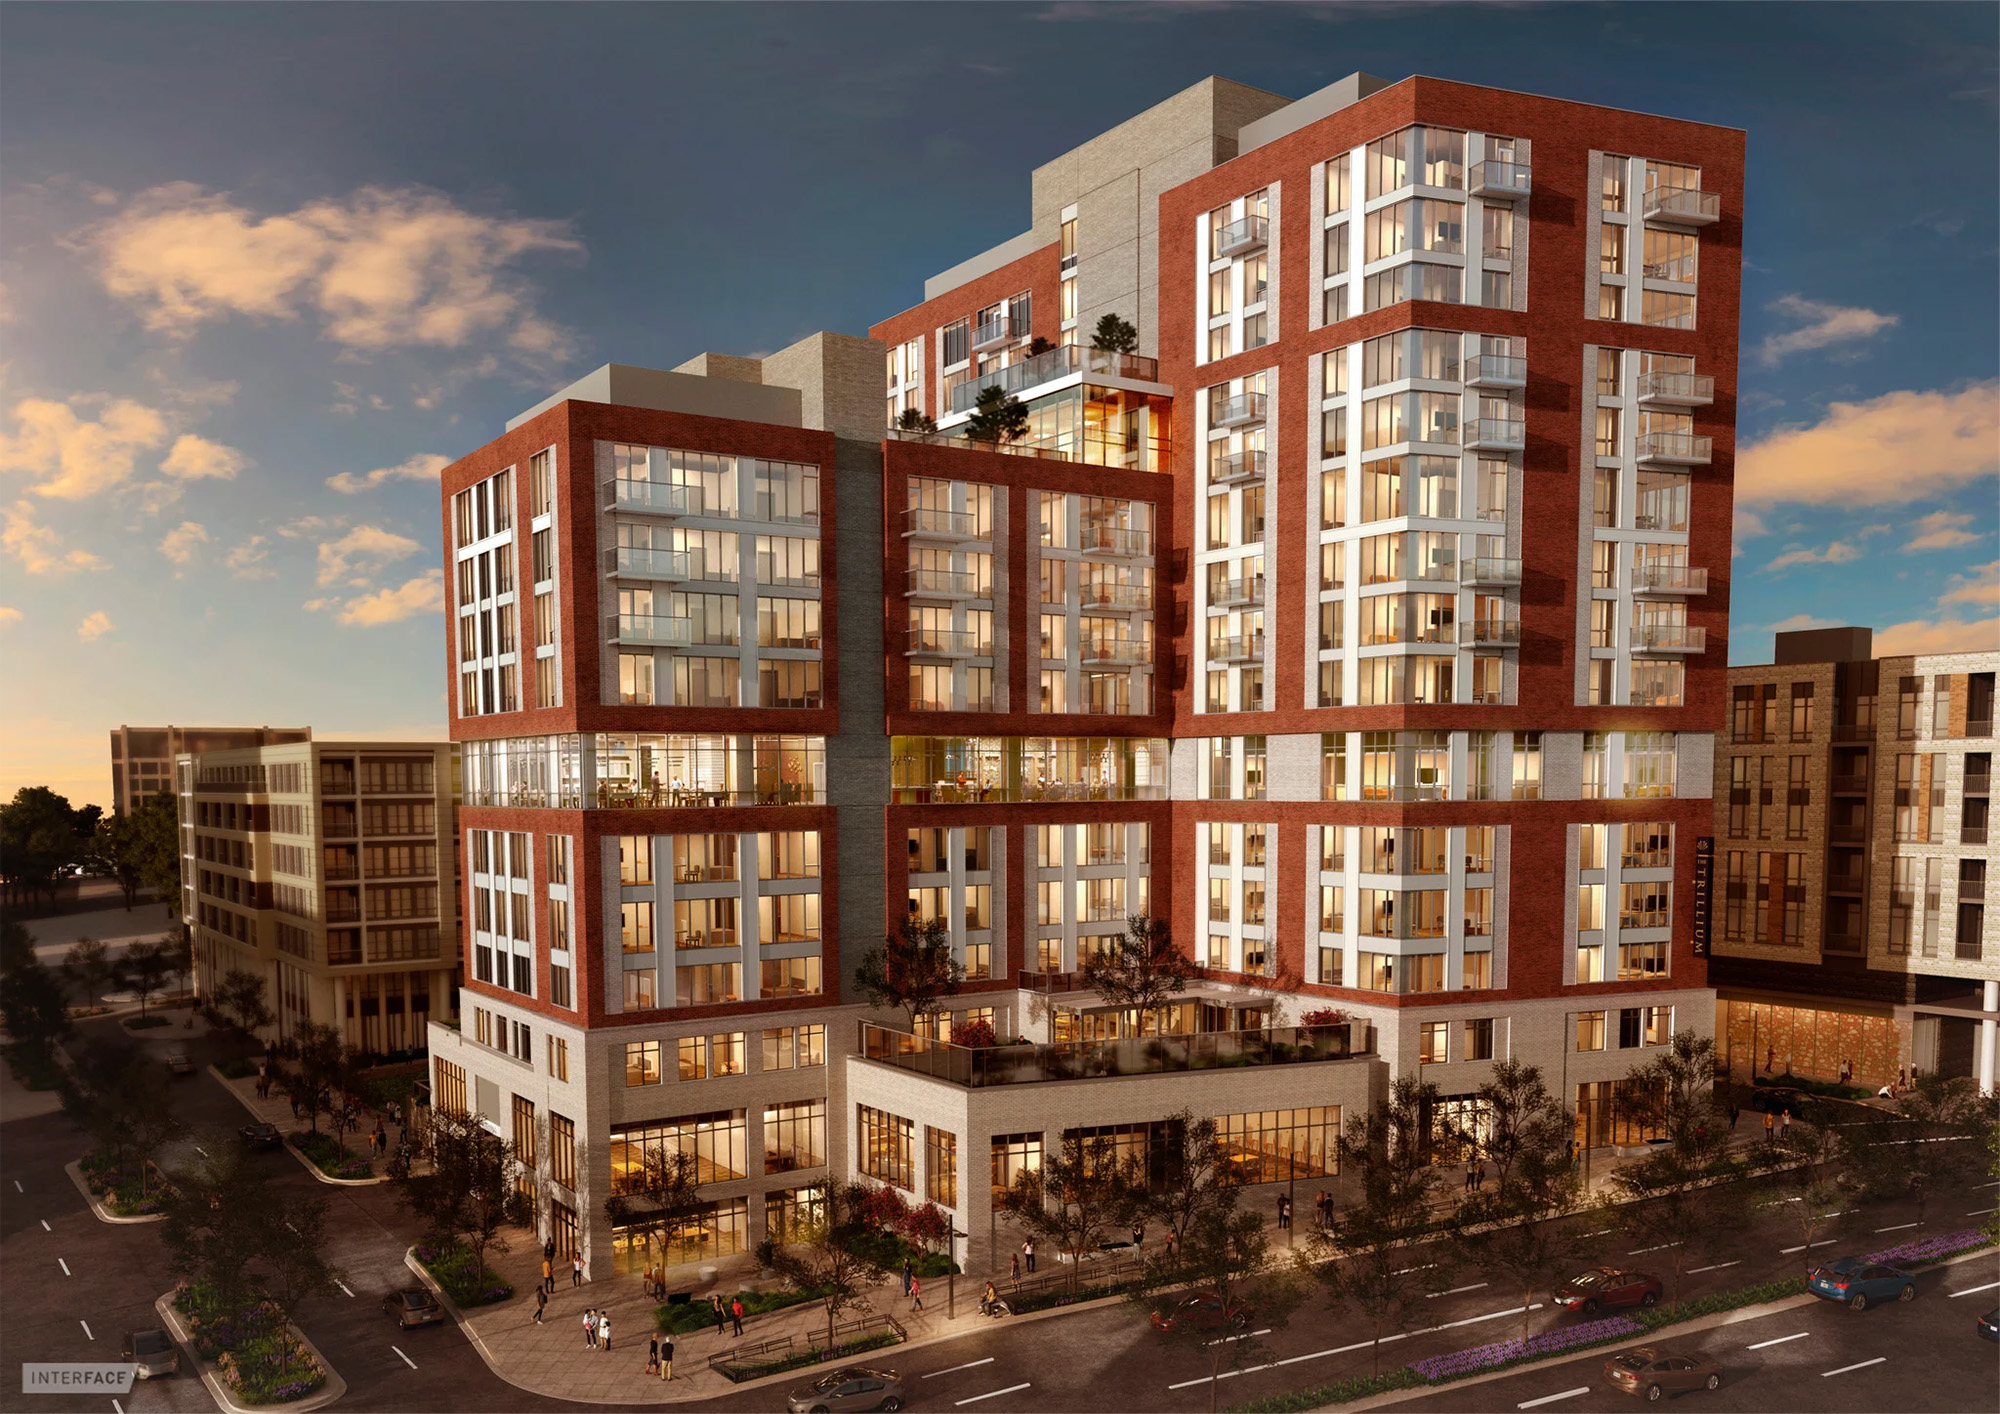 The Trillium, a 15-story senior living residential tower with street-level retail and multiple amenity levels, is a short walk from the Tysons Galleria mall in McLean, VA. 